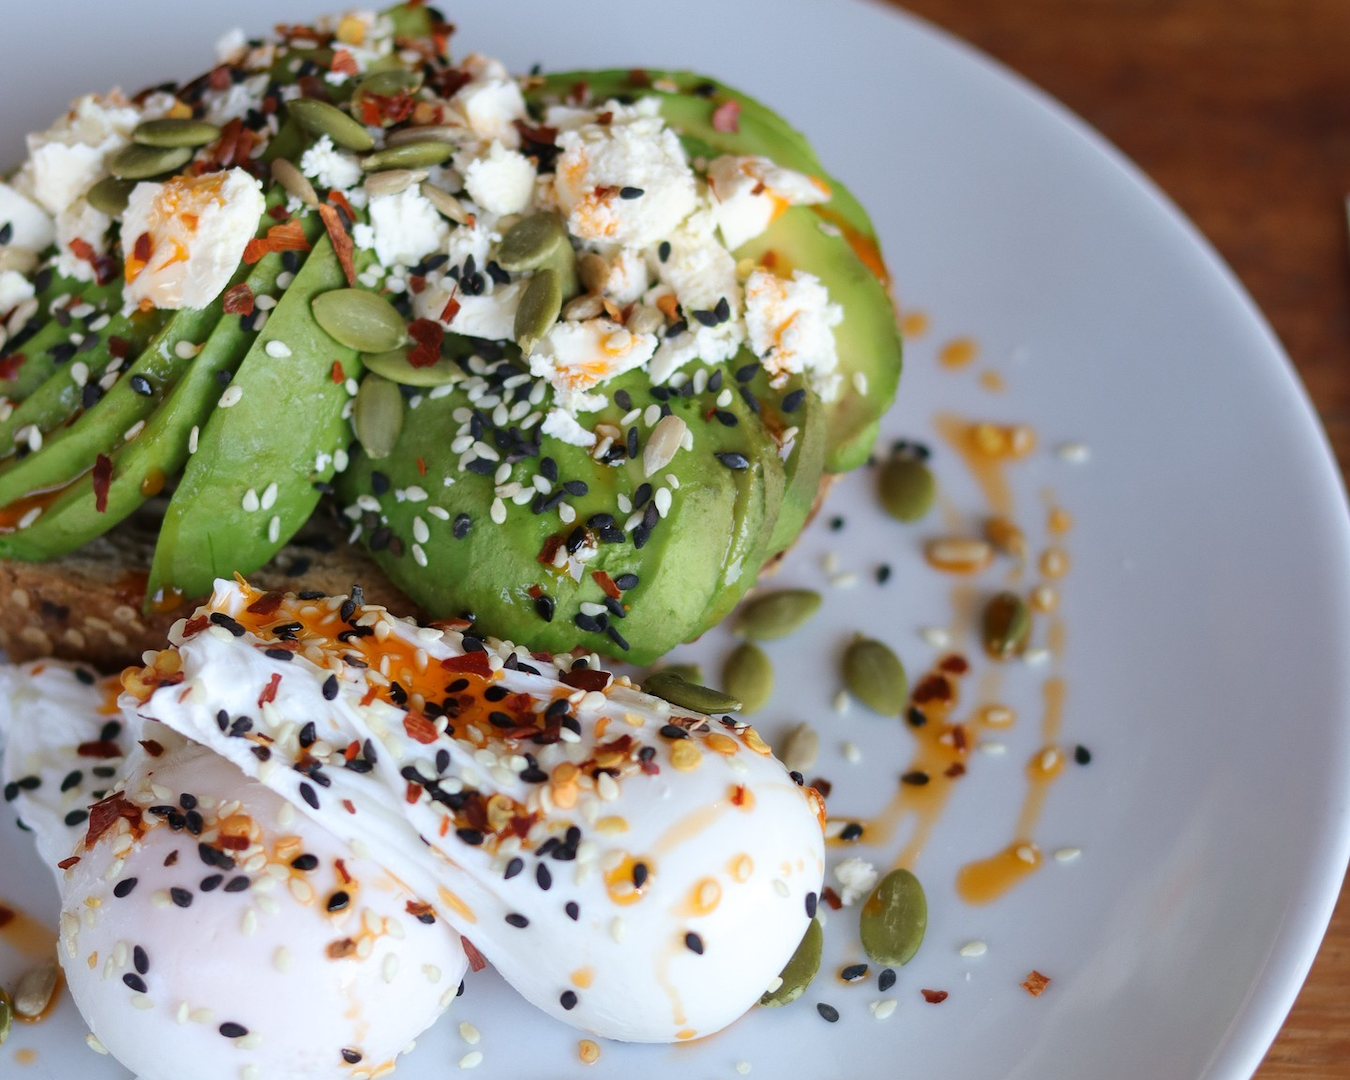 Eggs and avocado from The Imp in East Vic Park